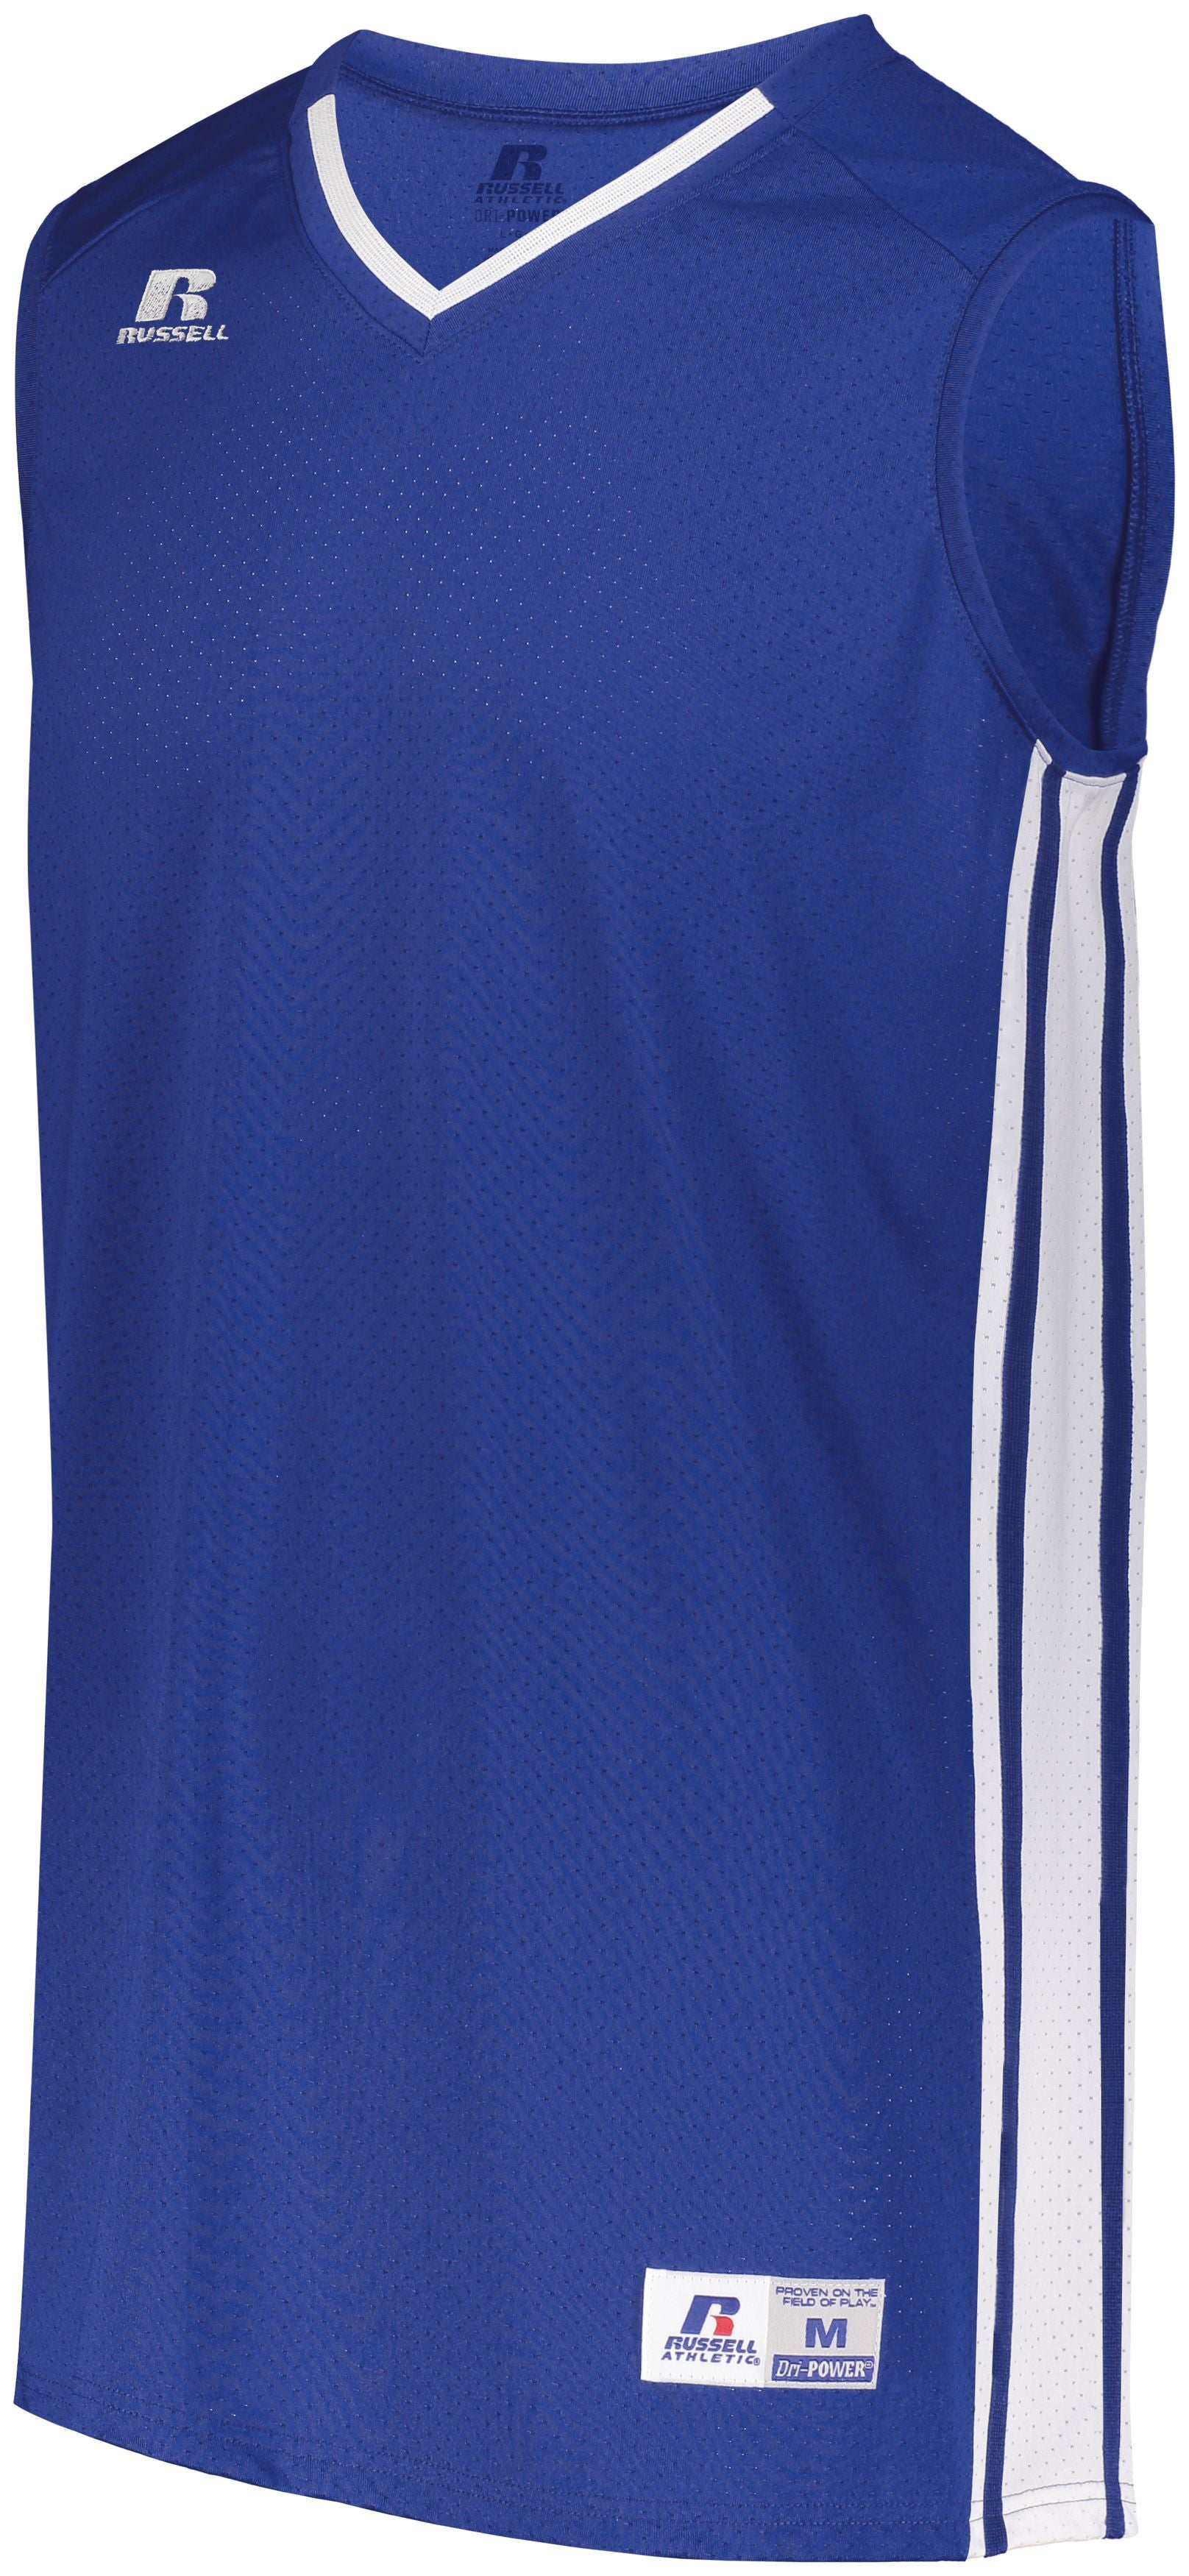 Russell Athletic Legacy Basketball Jersey in Royal/White  -Part of the Adult, Adult-Jersey, Basketball, Russell-Athletic-Products, Shirts, All-Sports, All-Sports-1 product lines at KanaleyCreations.com